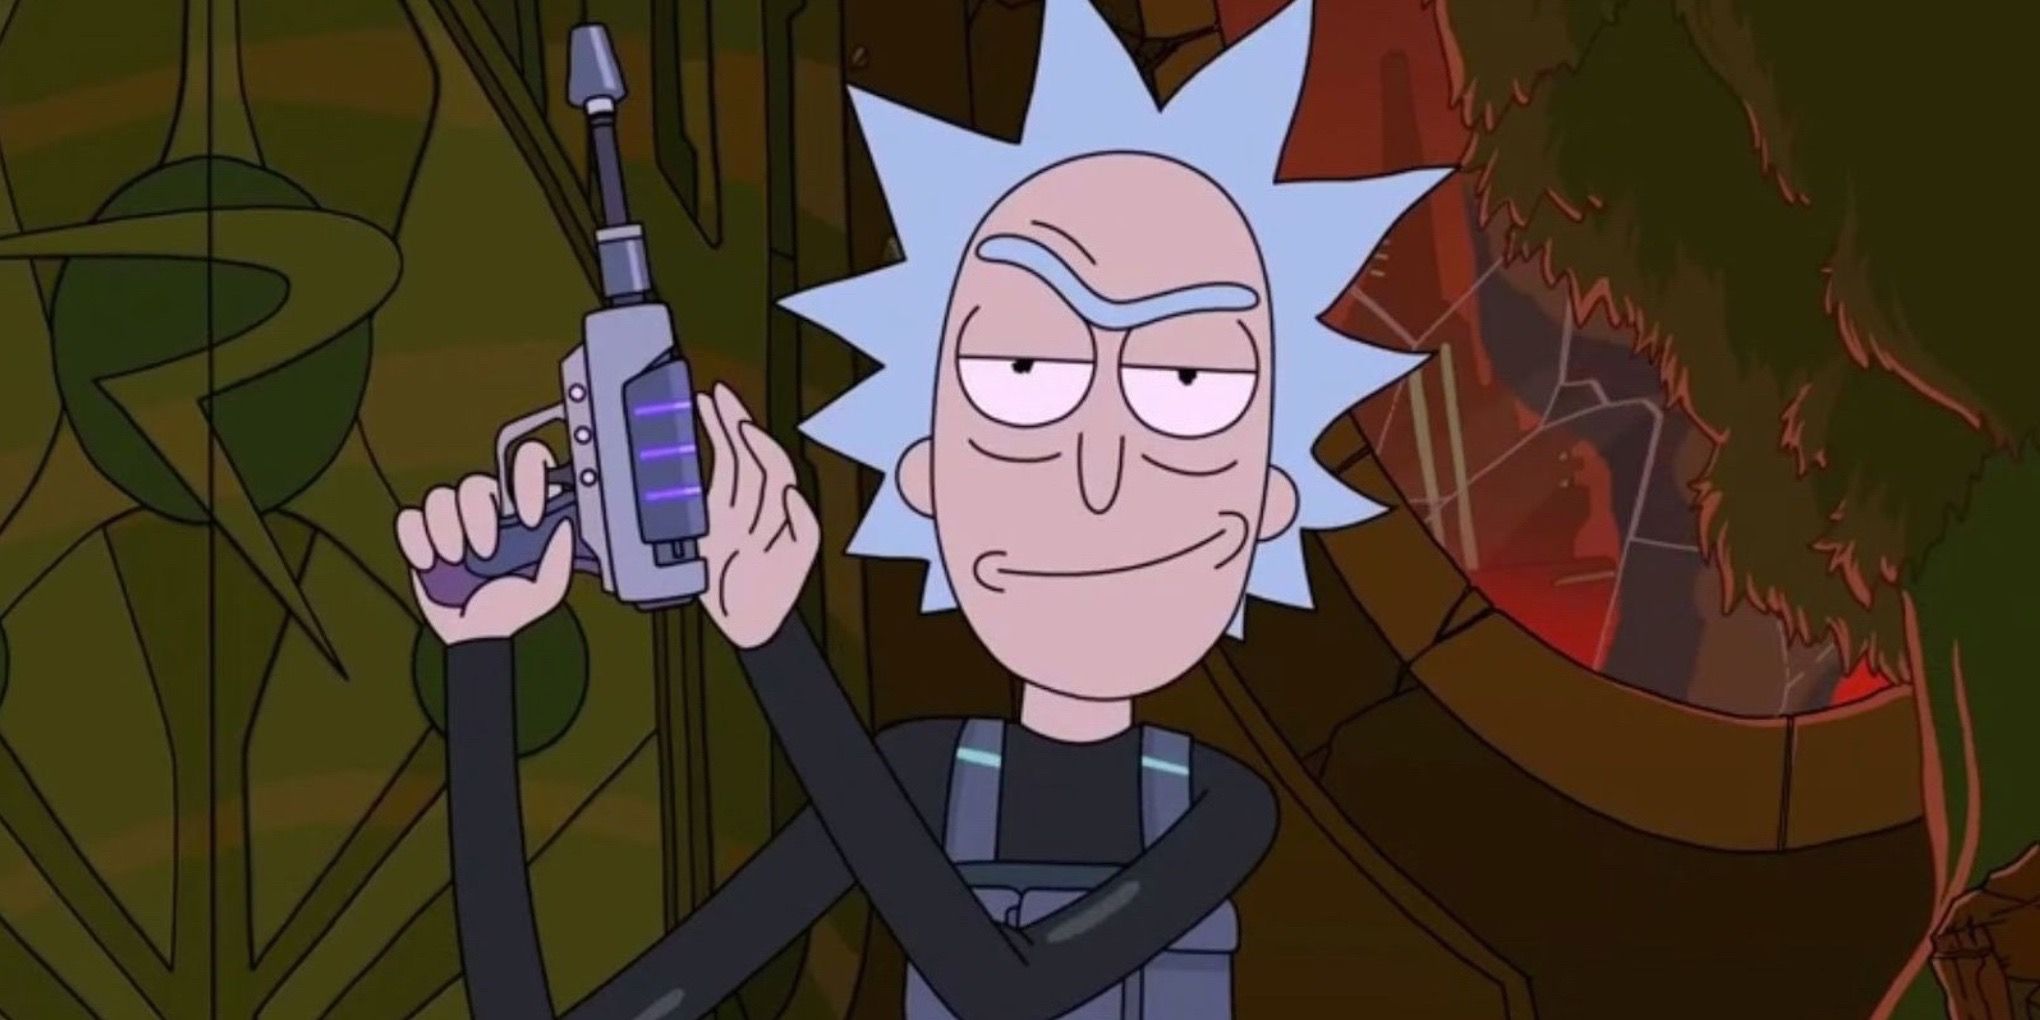 Rick Sanchez in action mode on Rick and Morty